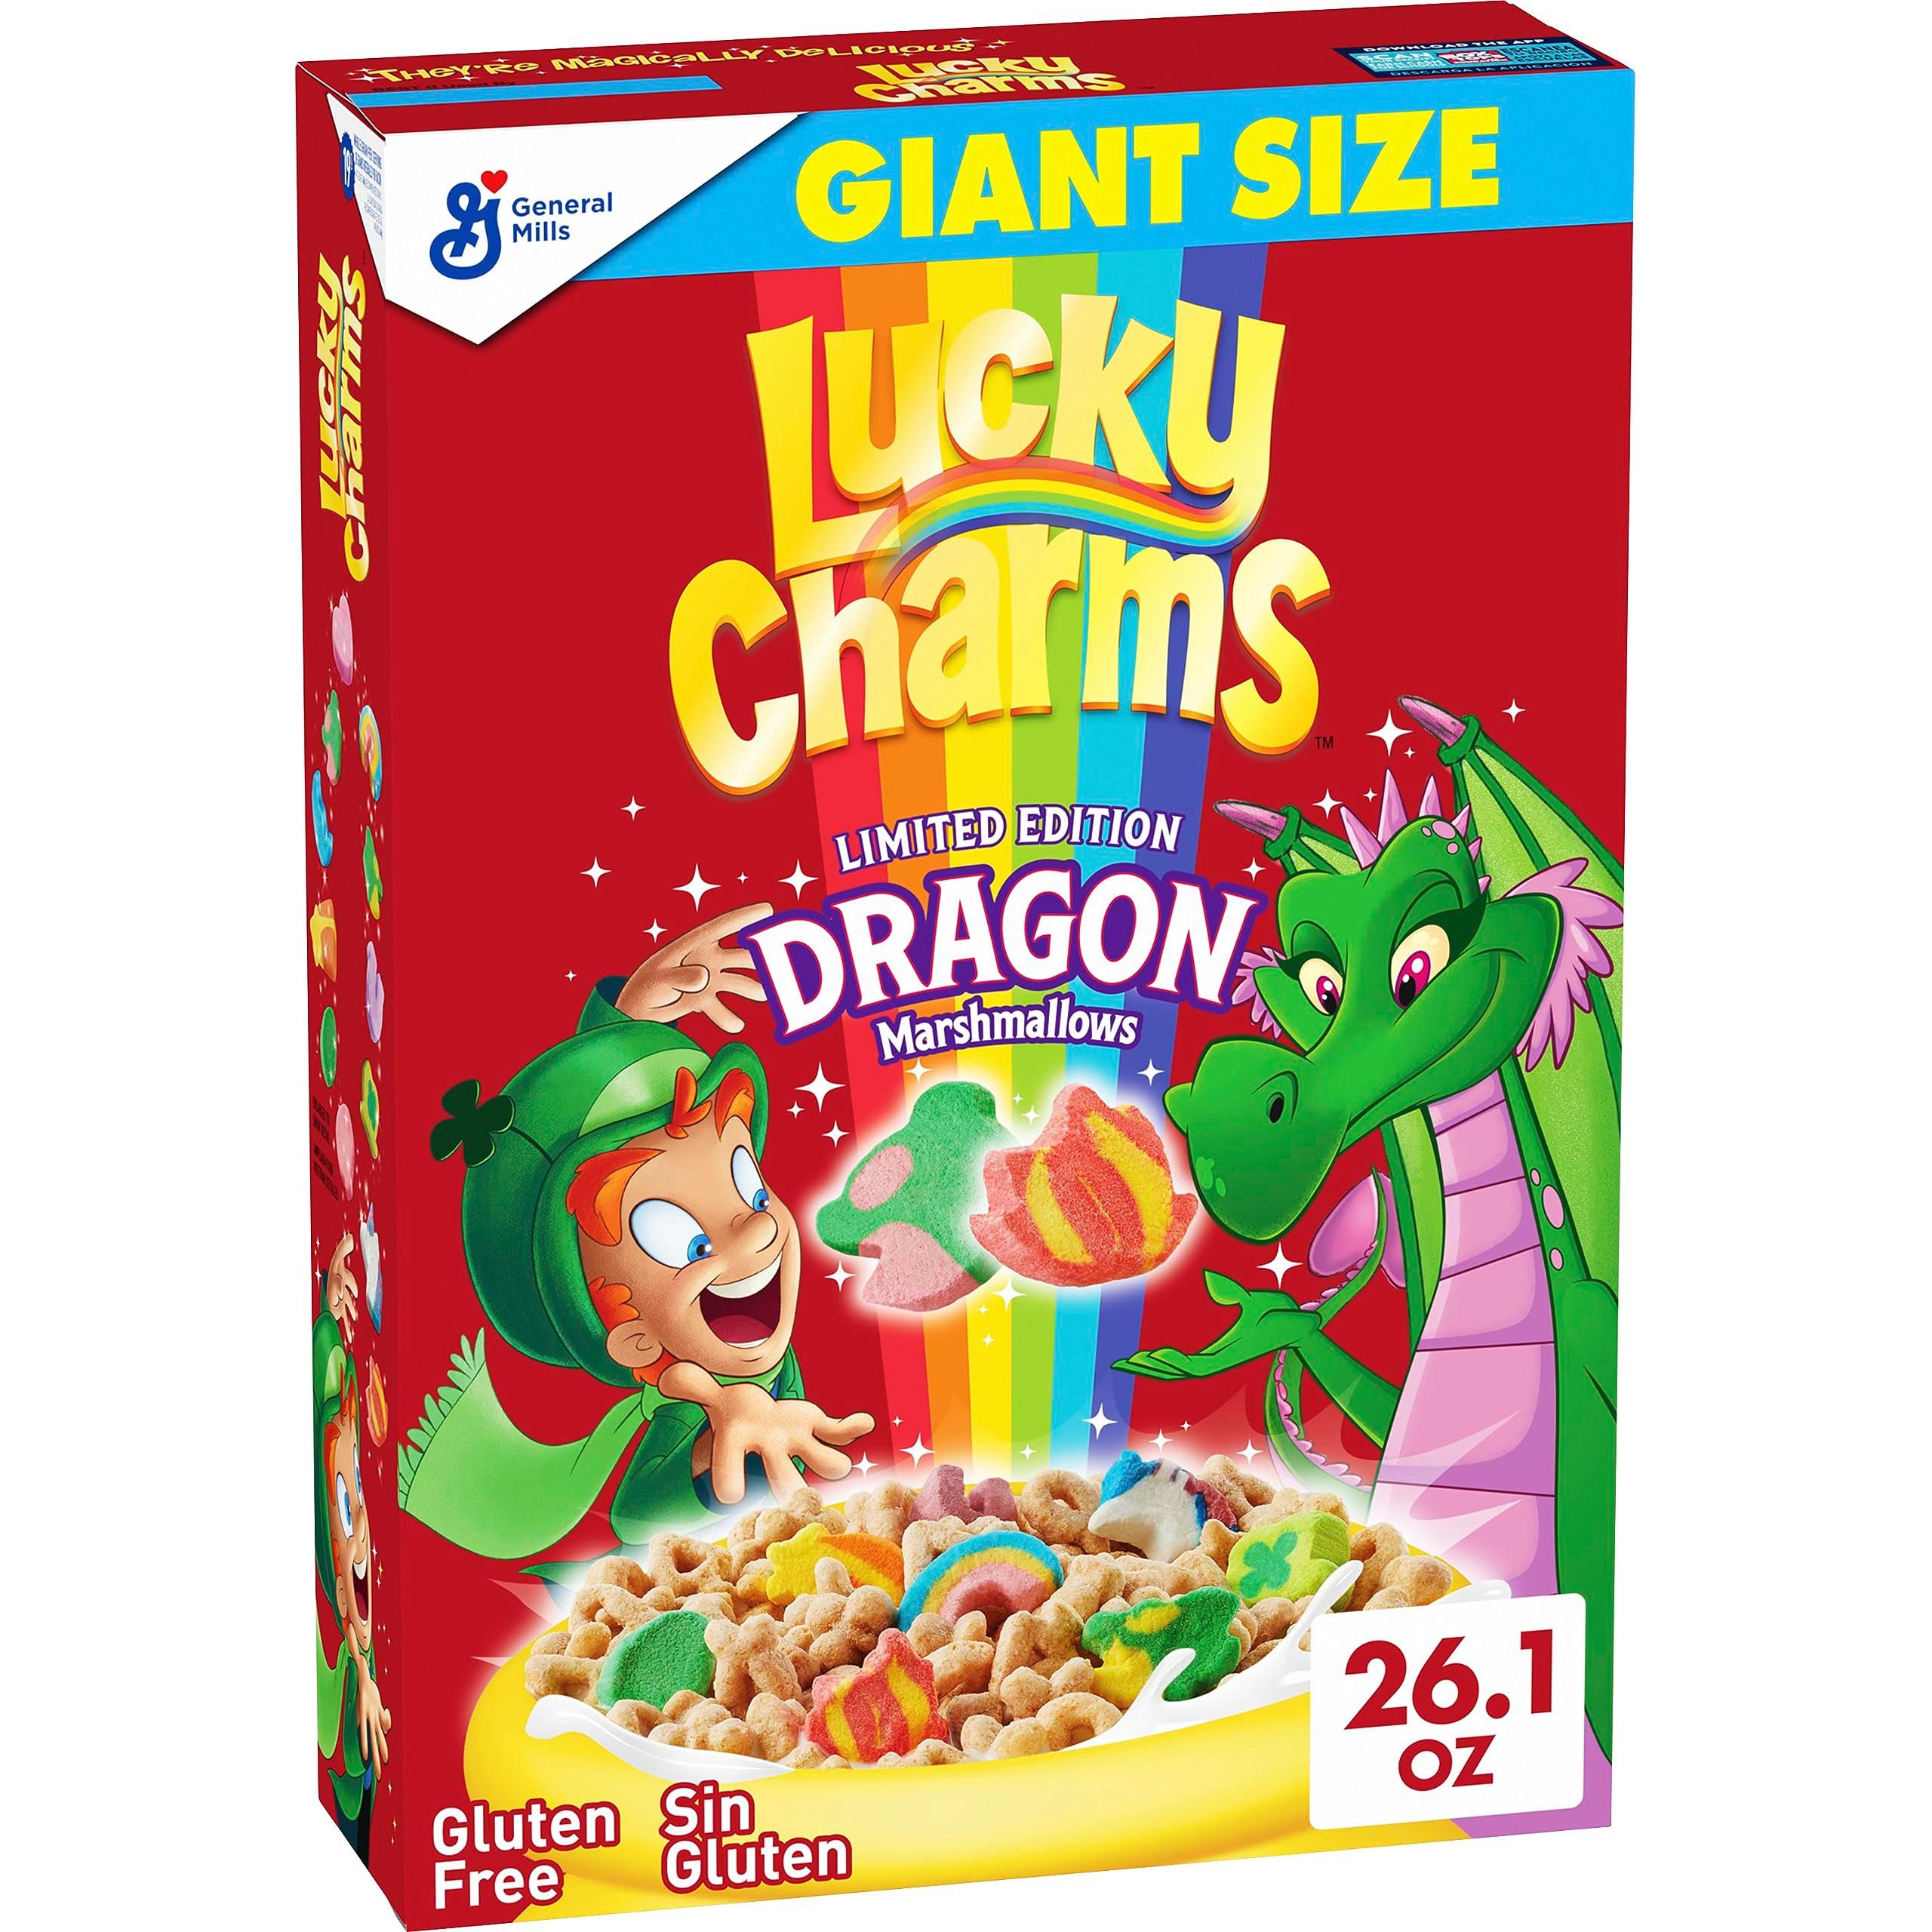 Lucky Charms Gluten Free Cereal with Marshmallows, Kids Breakfast Cereal, Made with Whole Grain, Giant Size, 26.1 oz